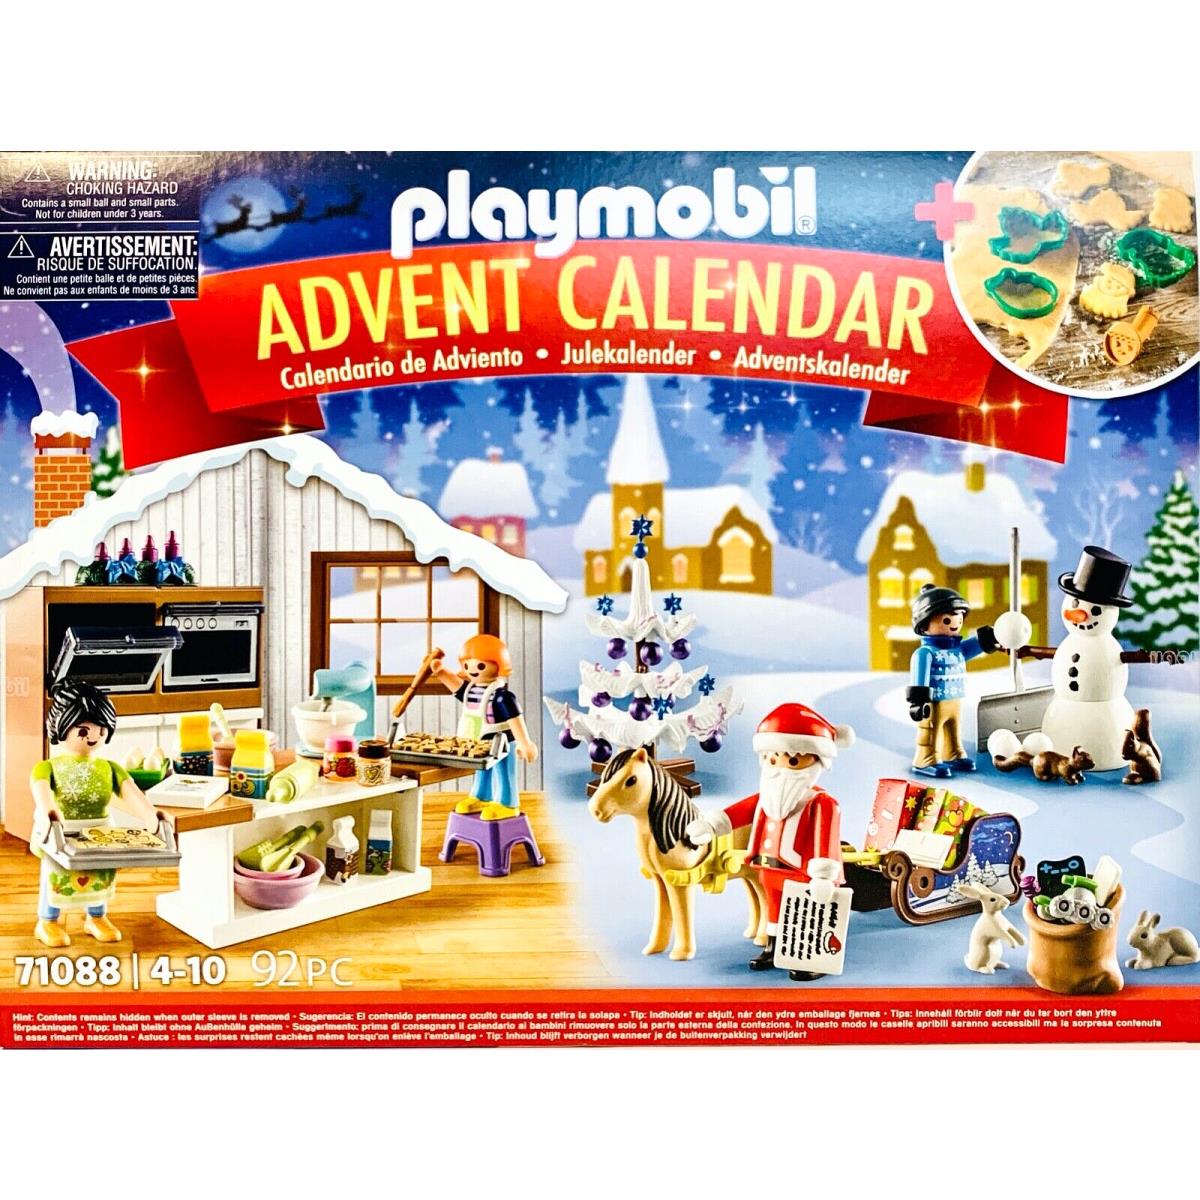 Playmobil Christmas Baking 71088 Advent Calendar 92 Pieces Age 4-10 Years